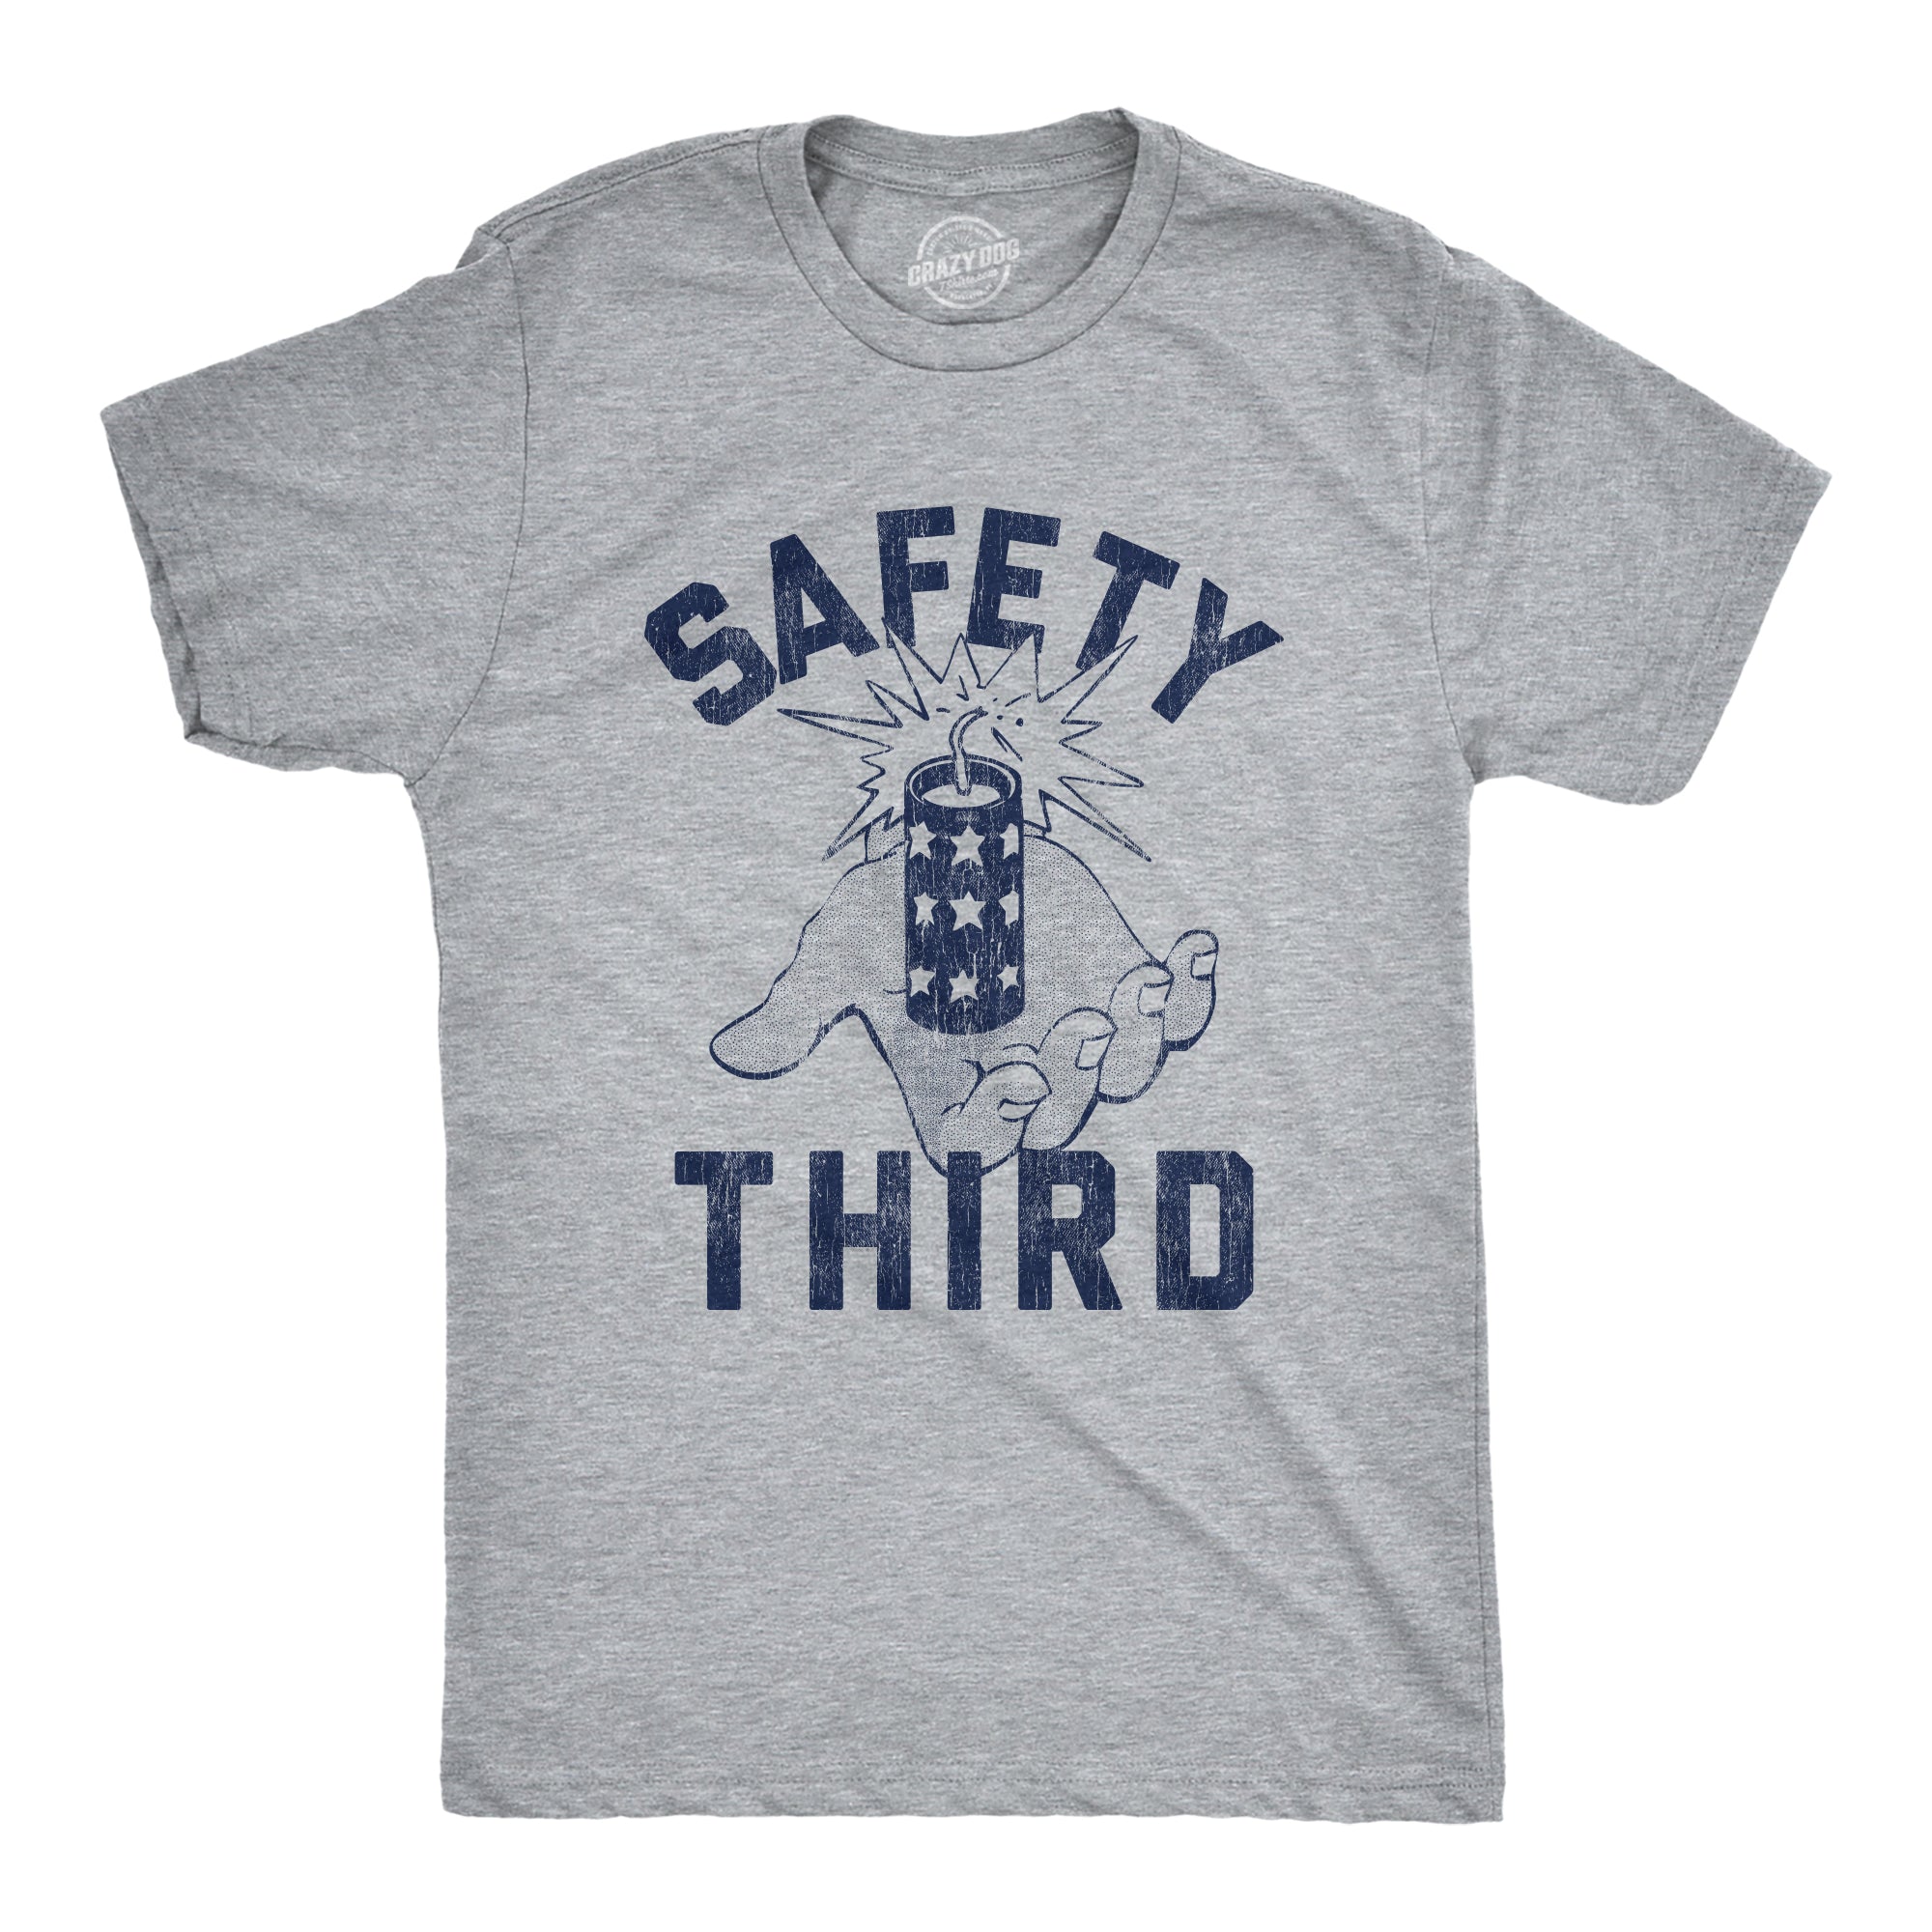 Funny Light Heather Grey - Safety Third Safety Third Mens T Shirt Nerdy Sarcastic Fourth of July Tee